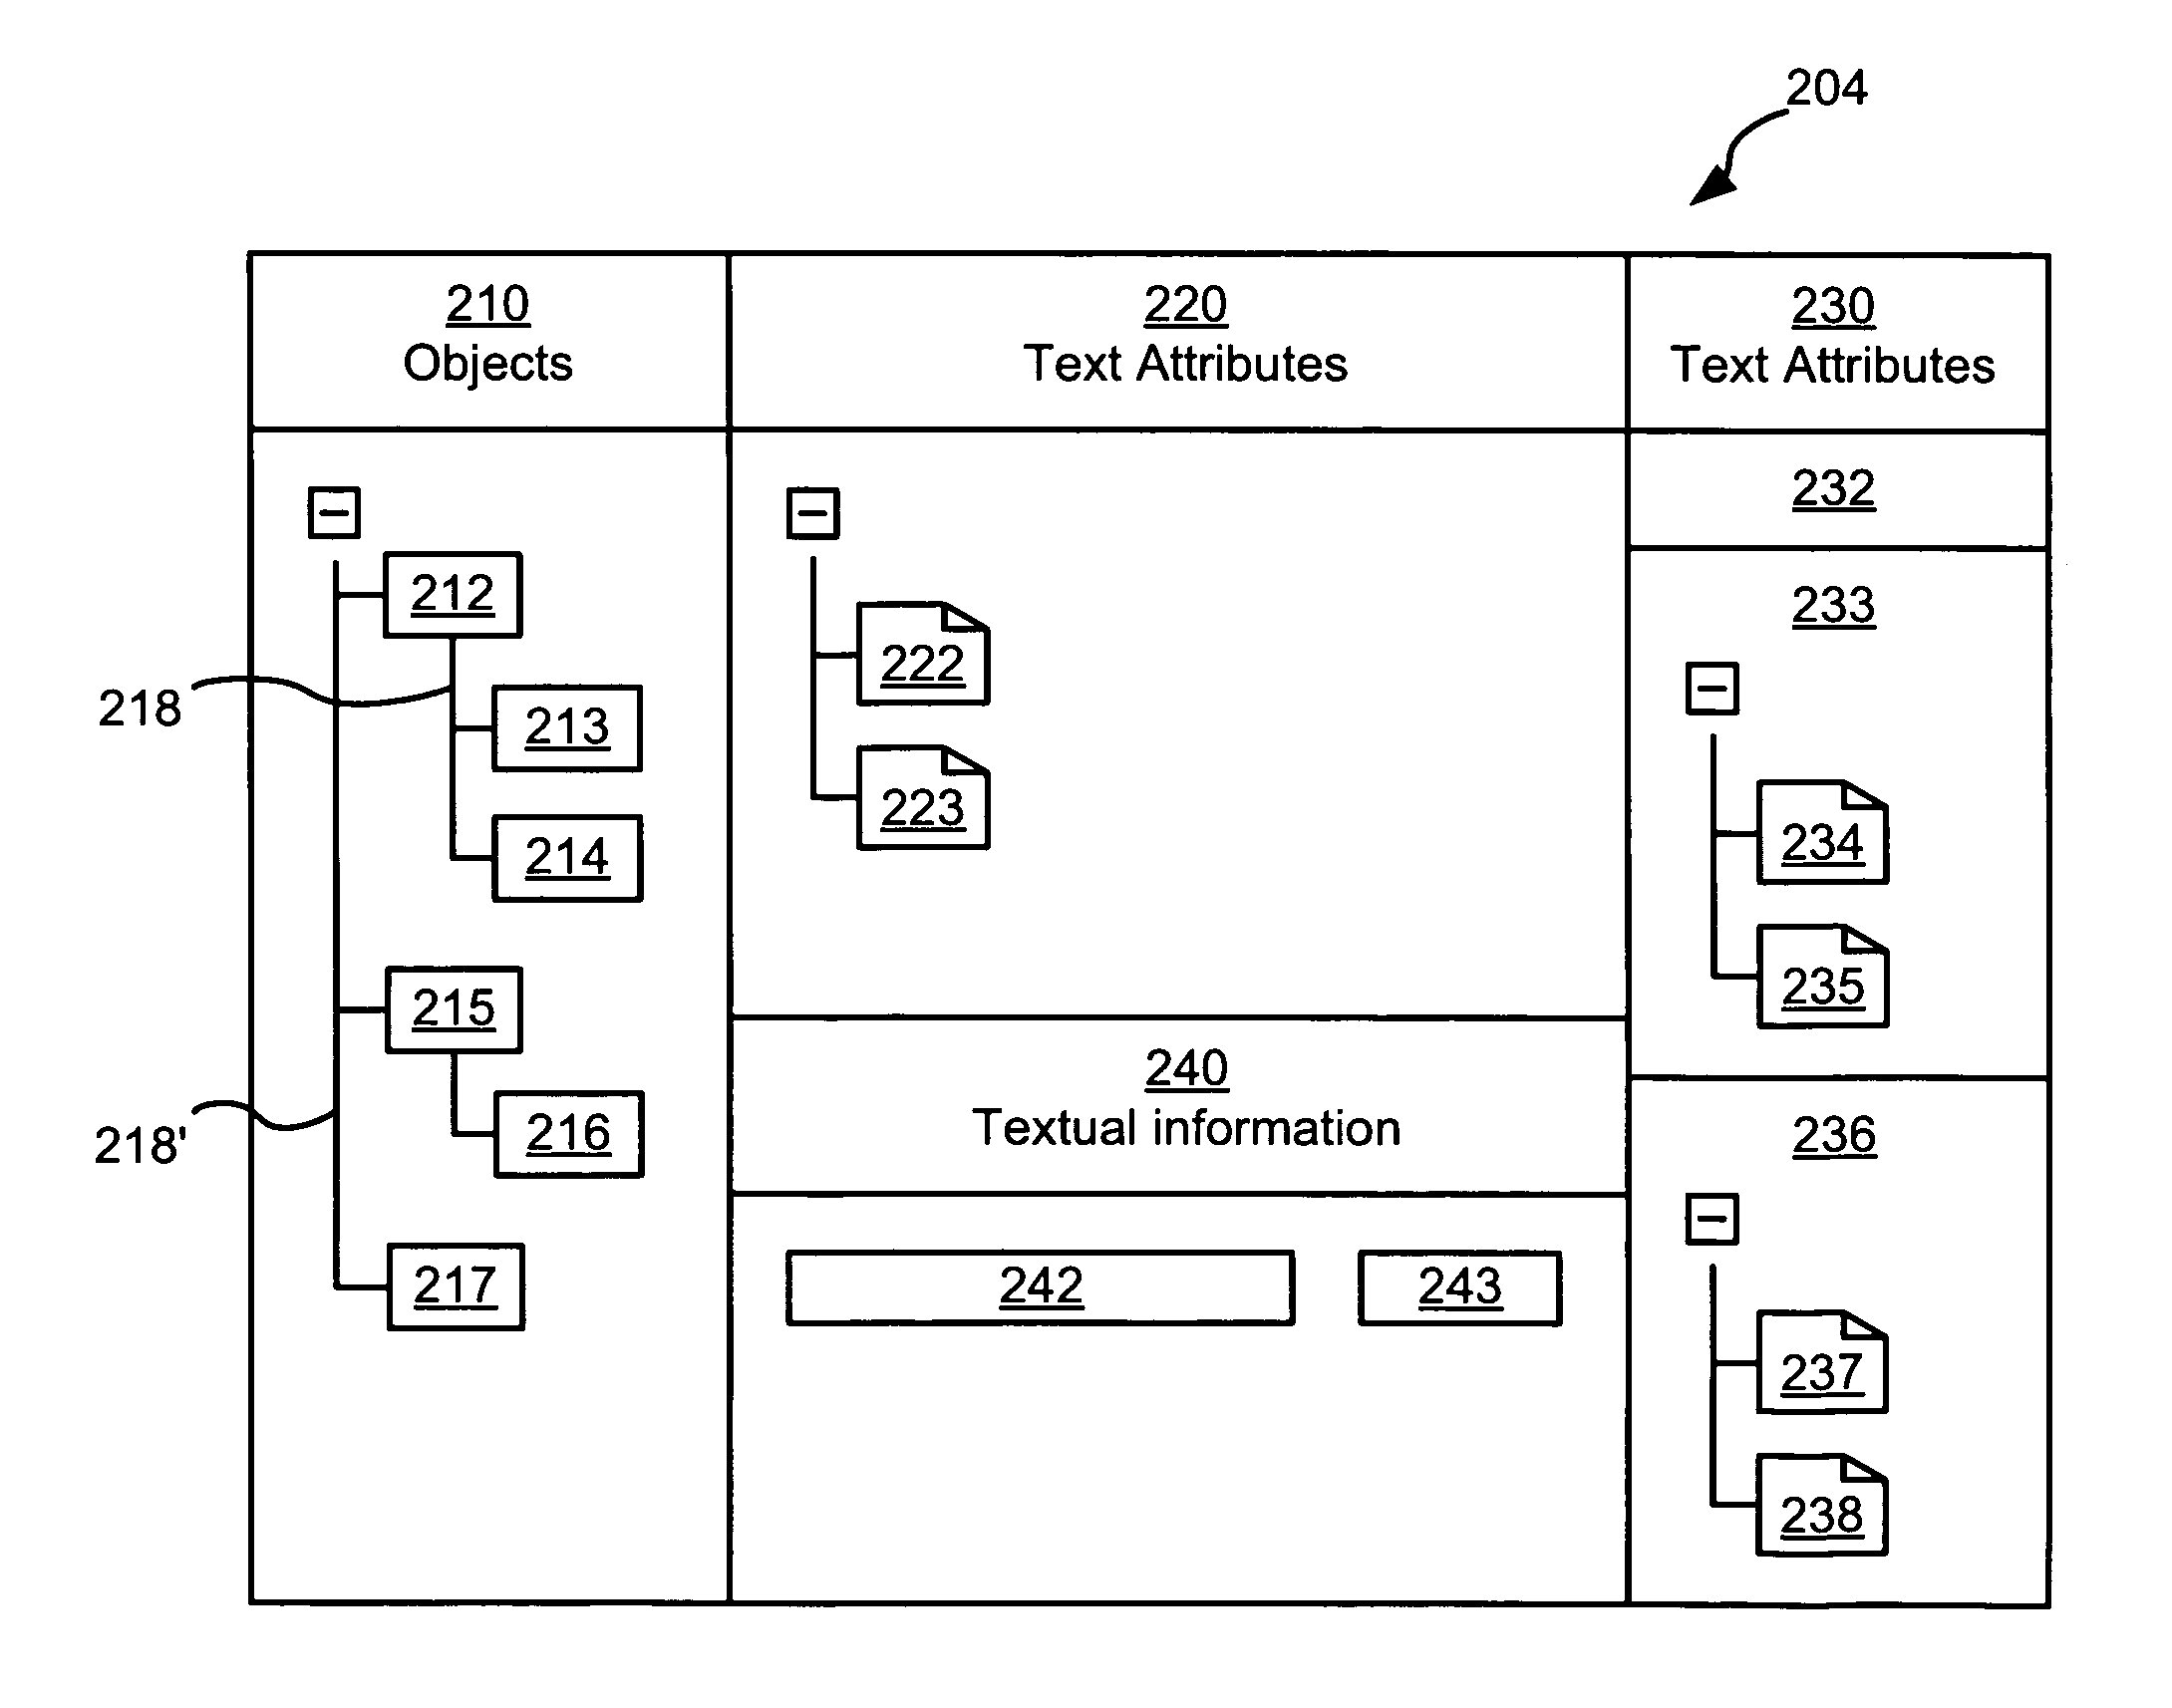 Method for generating documentation for a building control system